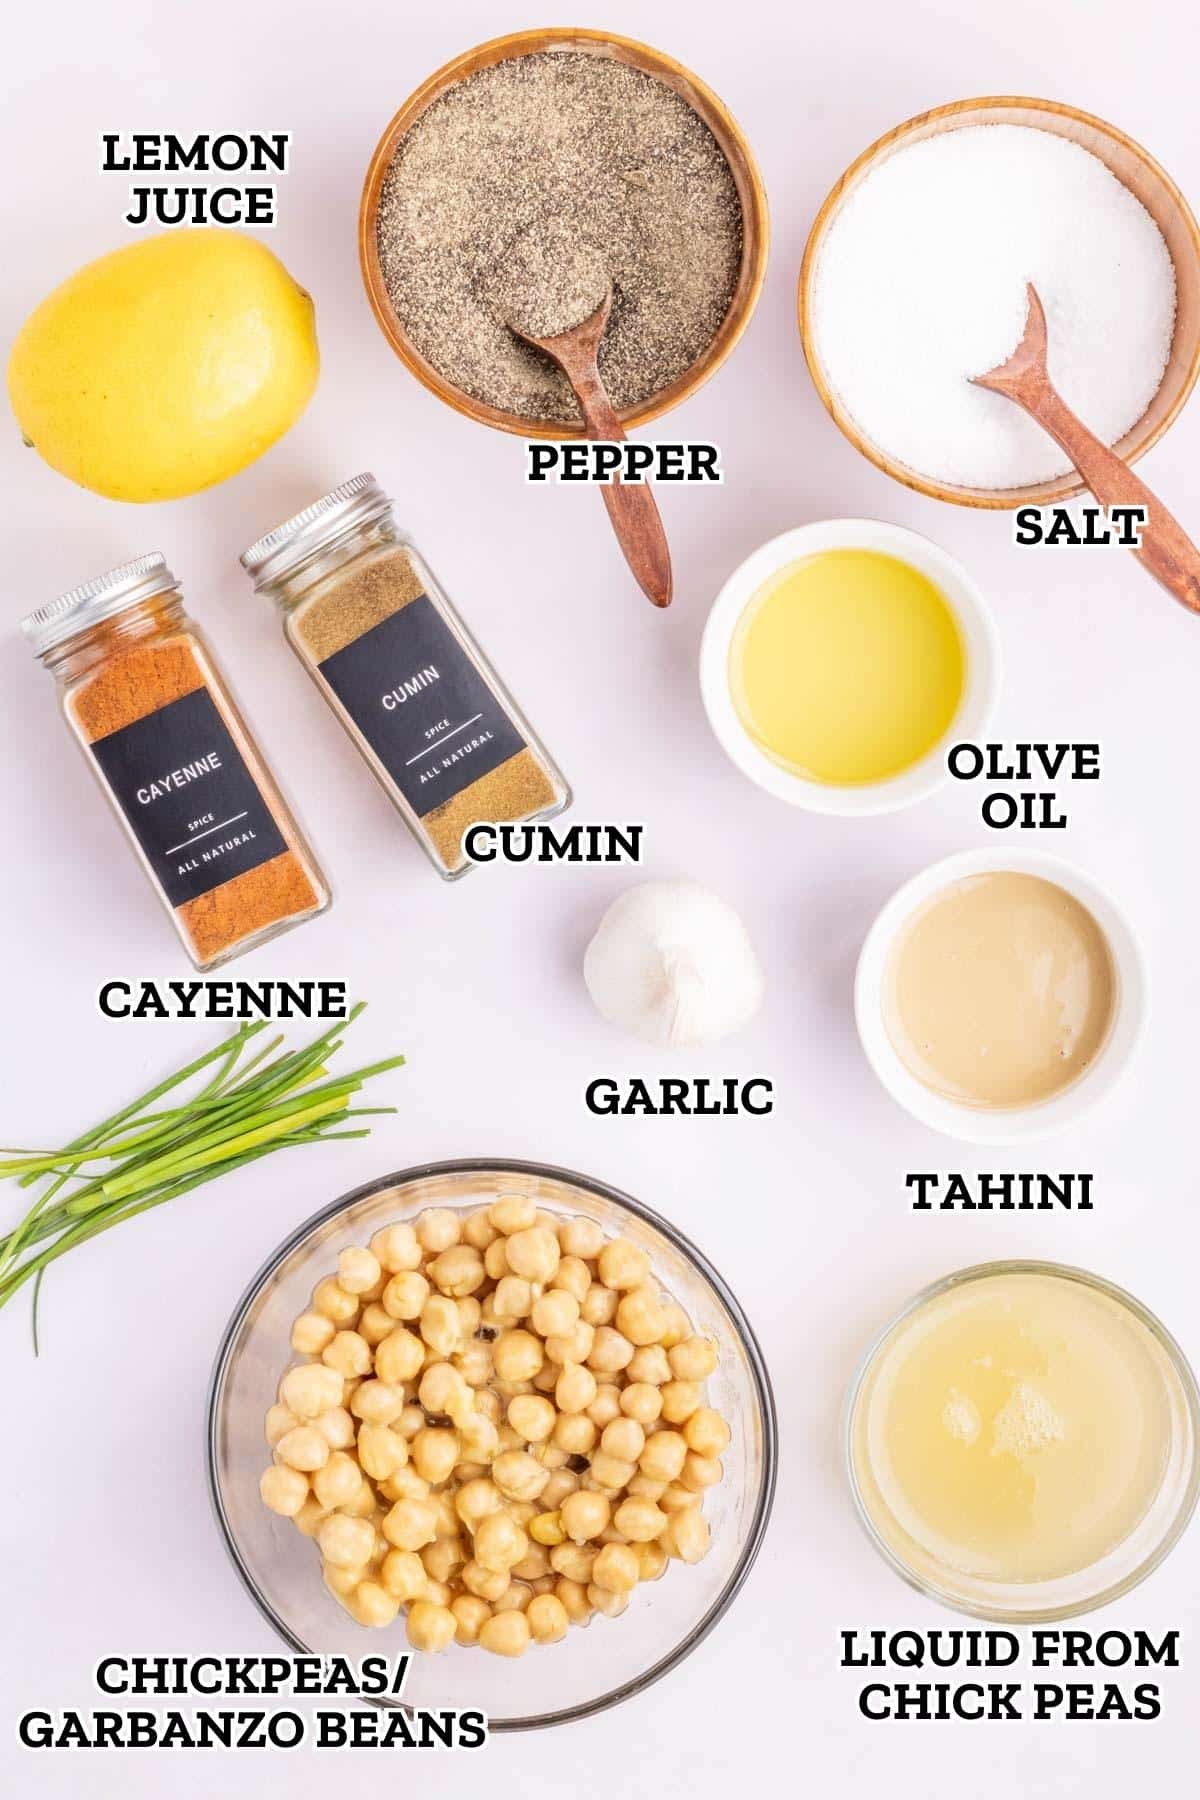 A labeled image of ingredients needed for creamy garlic hummus.